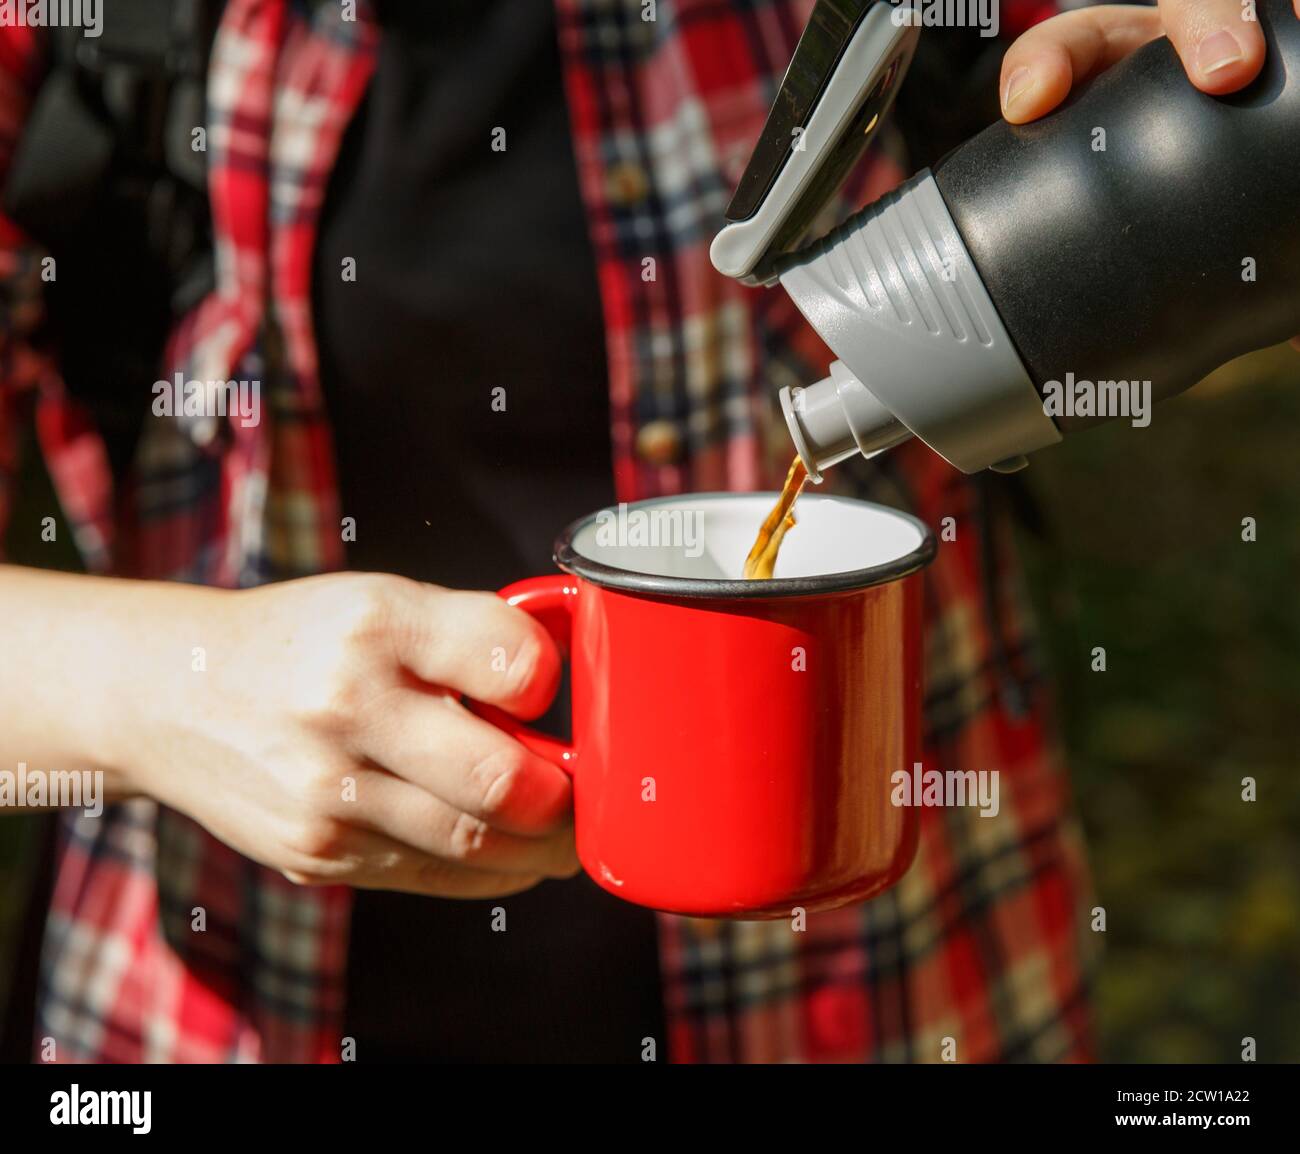 https://c8.alamy.com/comp/2CW1A22/tourist-hands-pour-coffee-from-a-thermos-into-a-metal-red-cup-2CW1A22.jpg